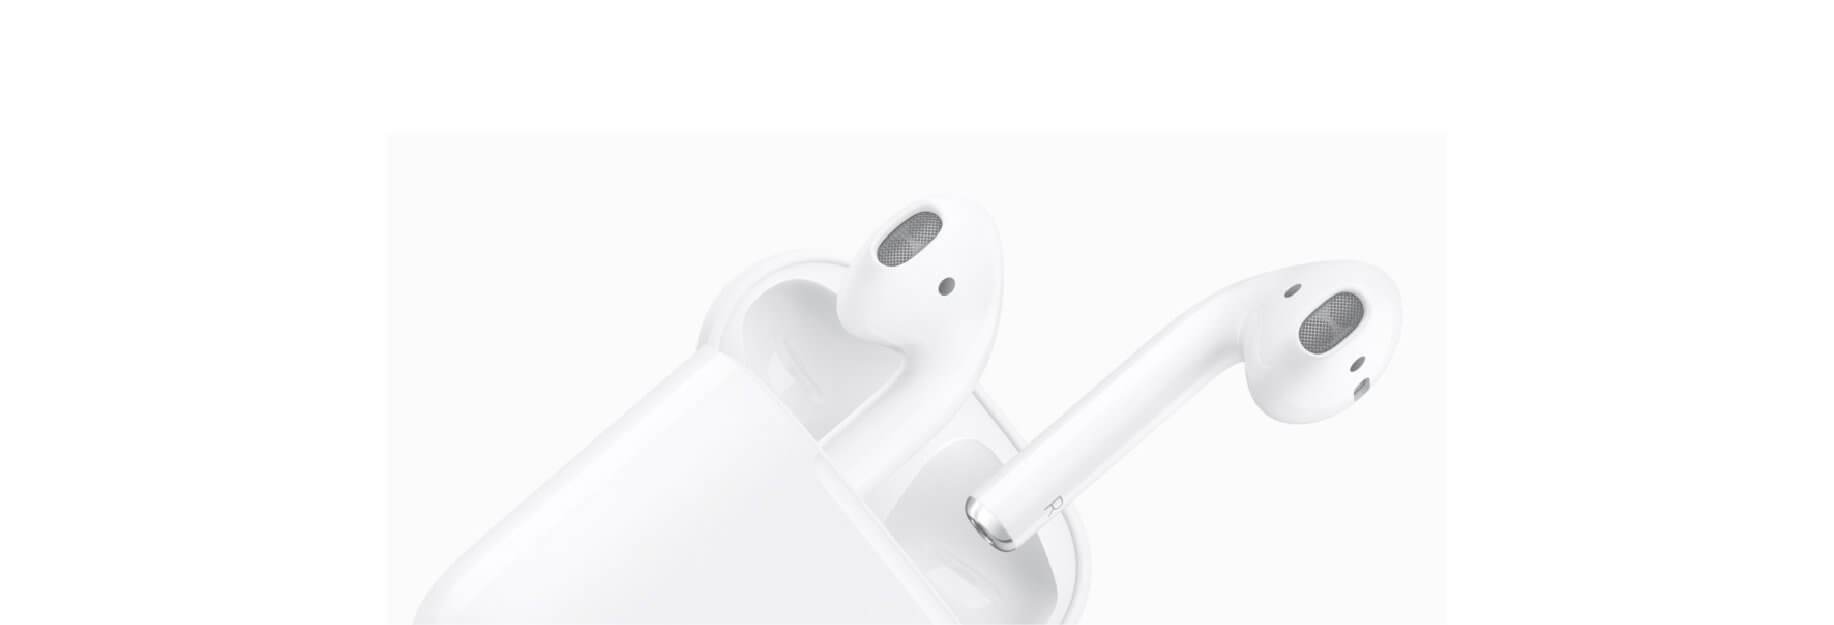 If your AirPods are lost